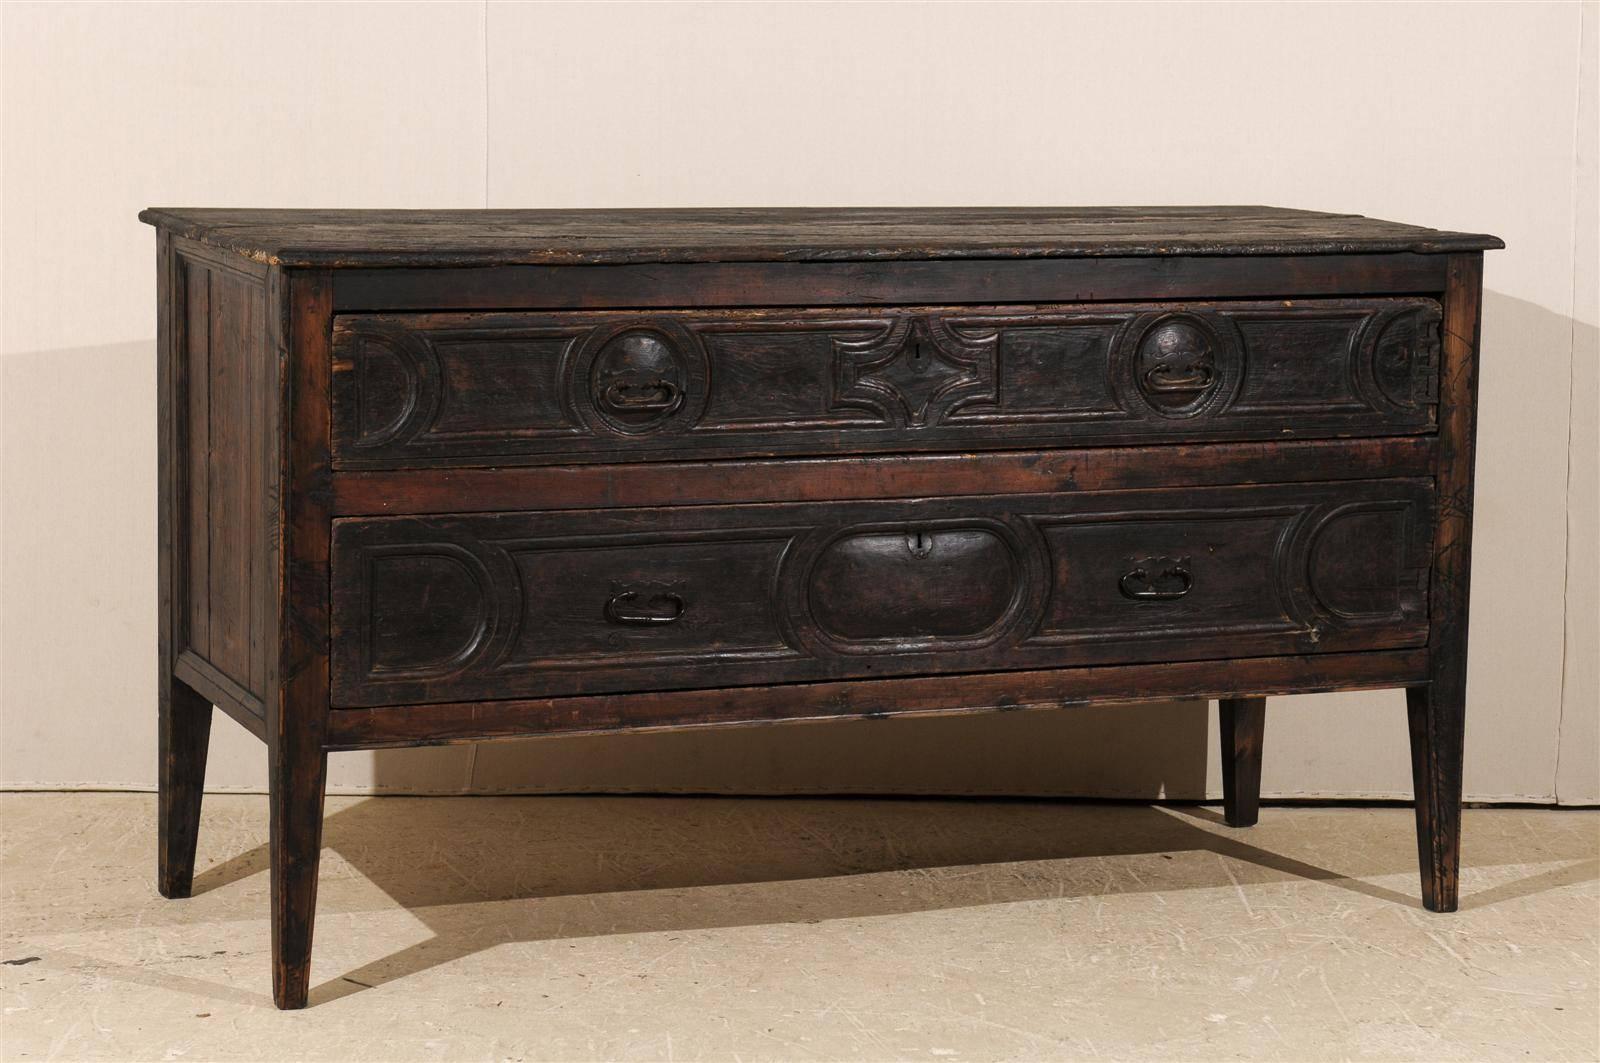 A grand 18th century Spanish two-drawer console table/server. This dark wood Spanish console features two dovetailed drawers decorated with geometrical motifs including medallion and semi-circular motifs. The console is raised on tapered legs.
   